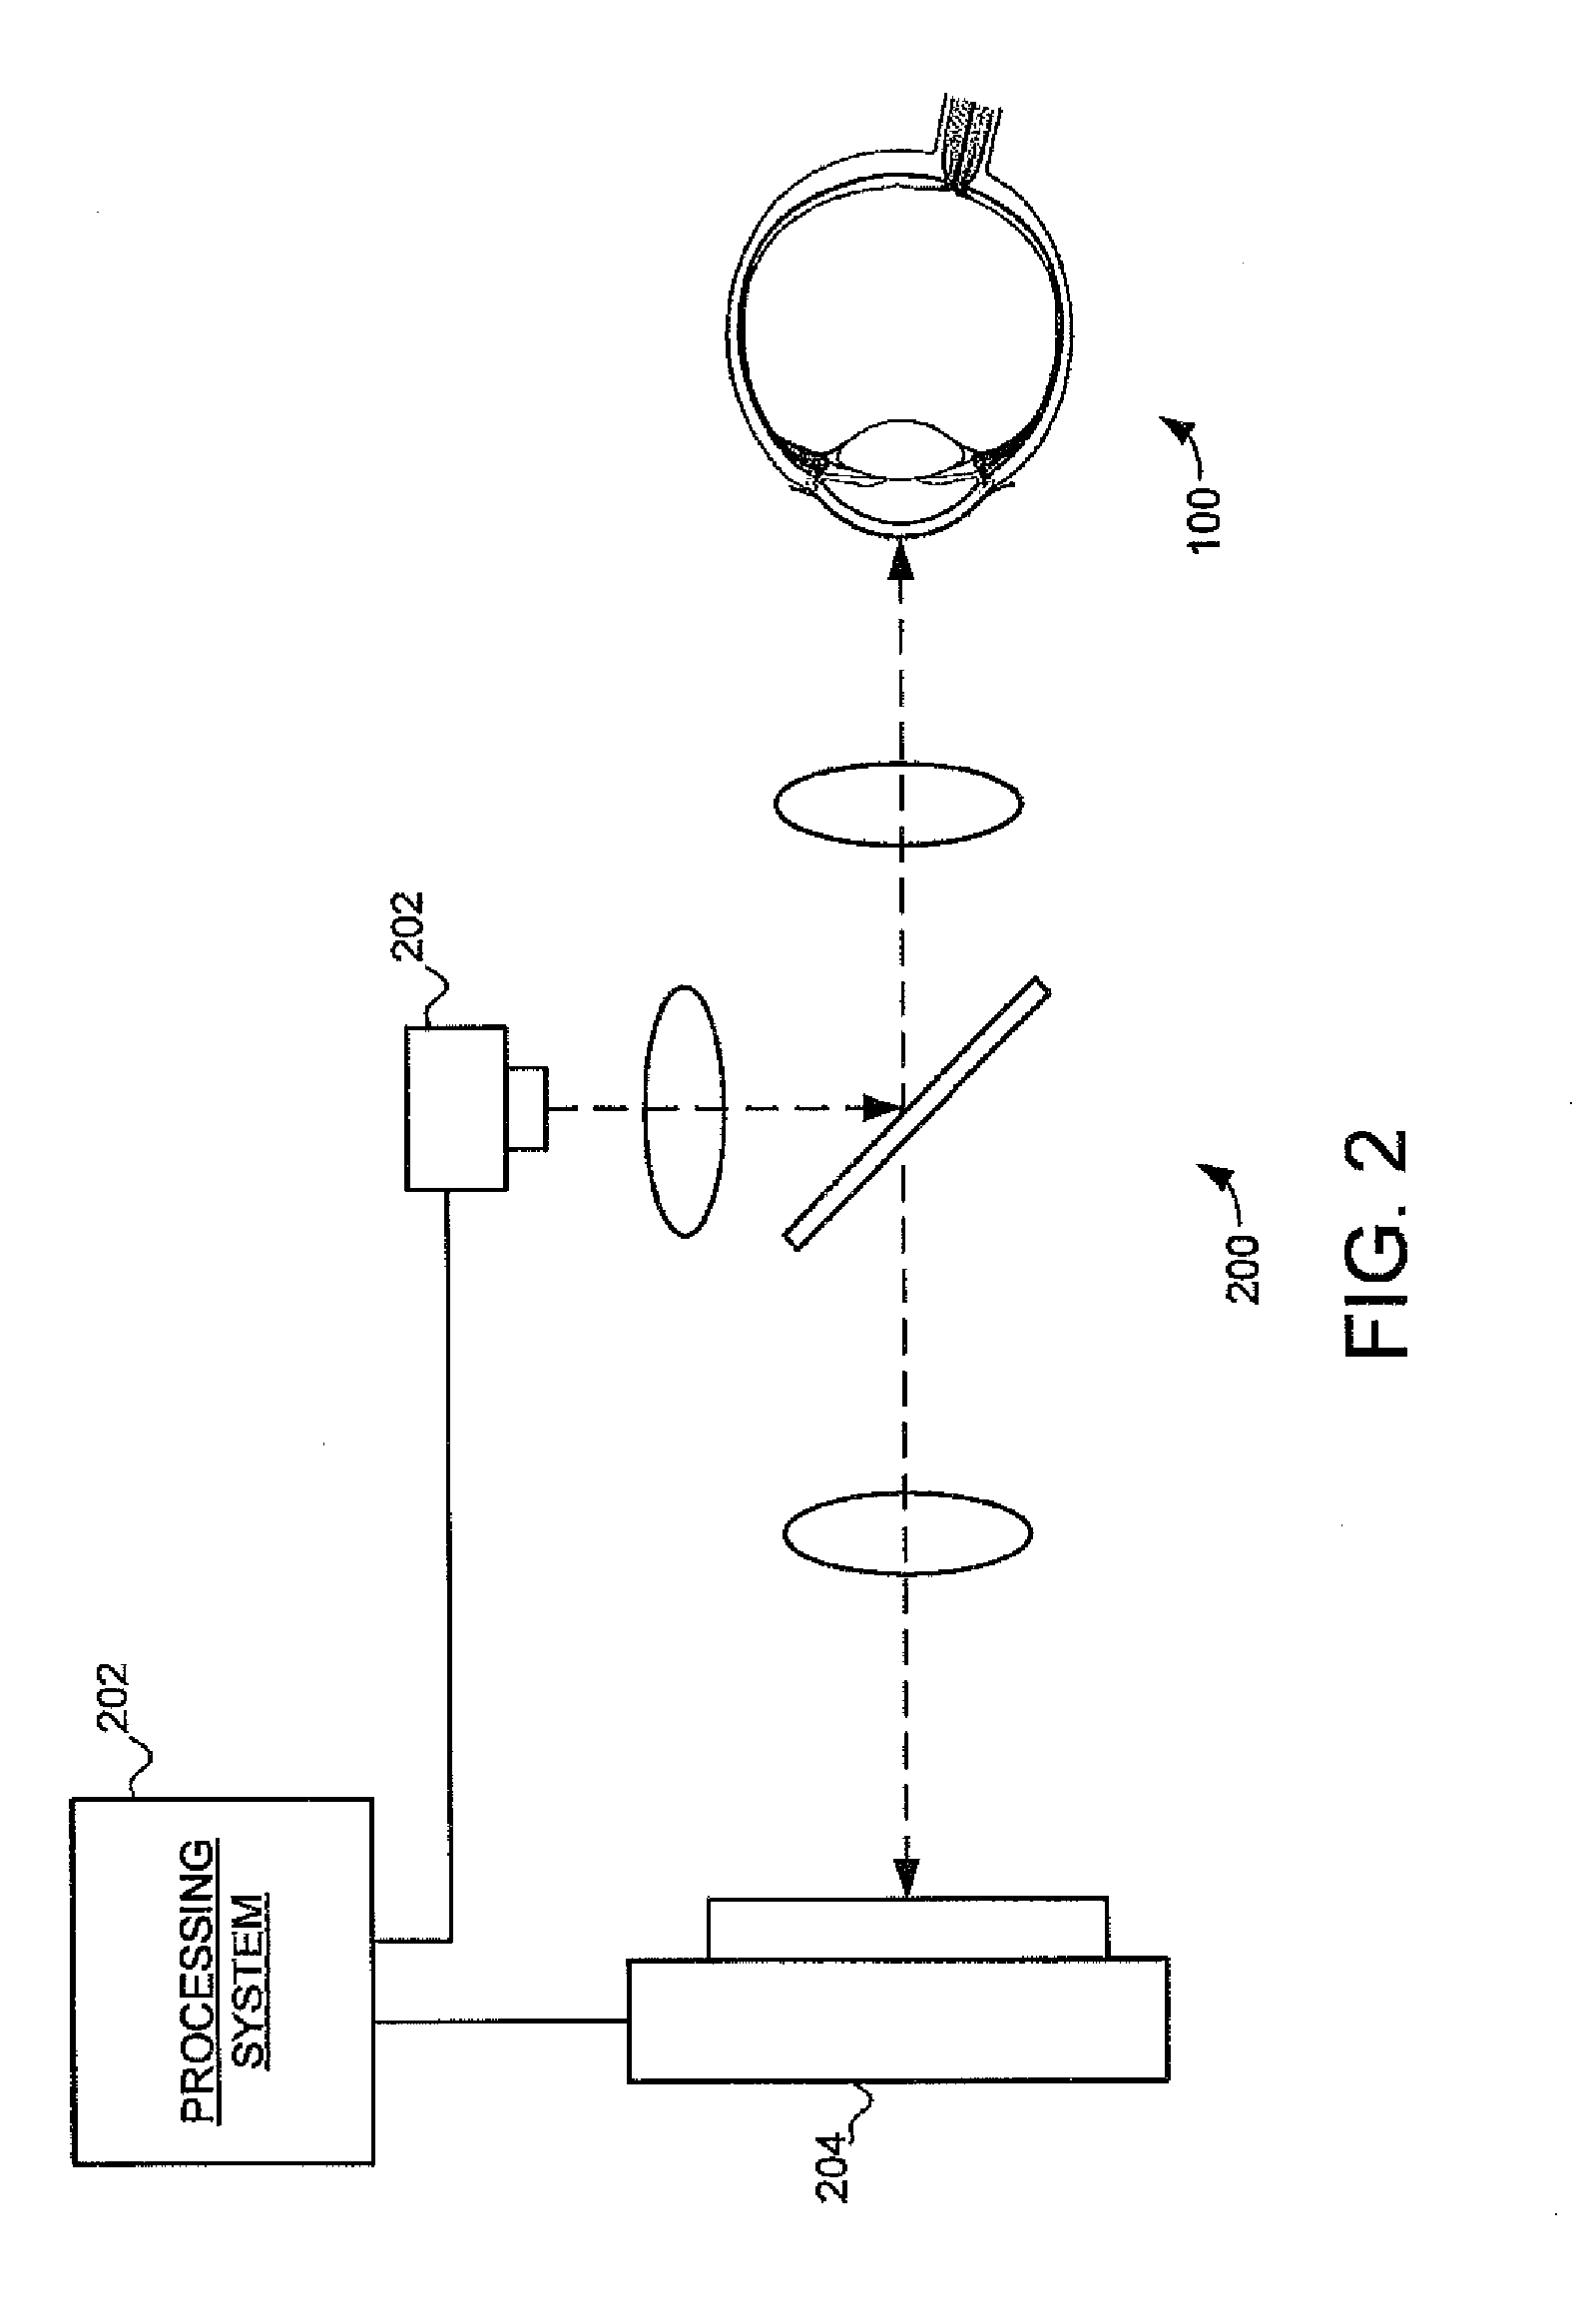 System and method for eye orientation